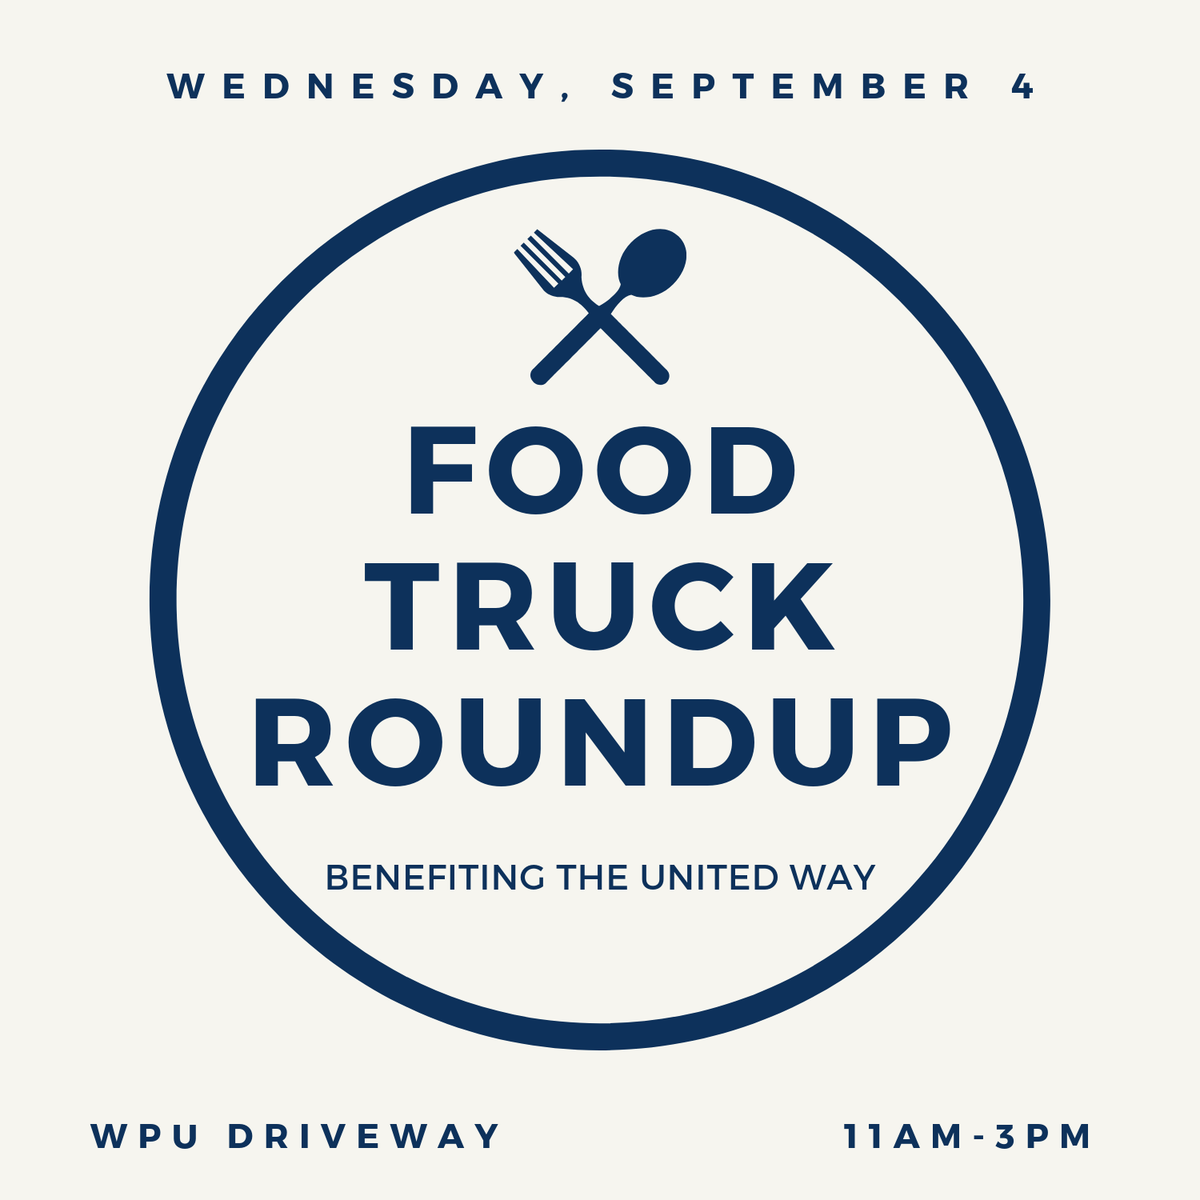 Make sure our Food Truck Roundup is on your calendar! Enjoy a great lunch while supporting the United Way on September 4.

#foodtrucks #pittsburghfoodtrucks #foodtruckroundup #unitedway